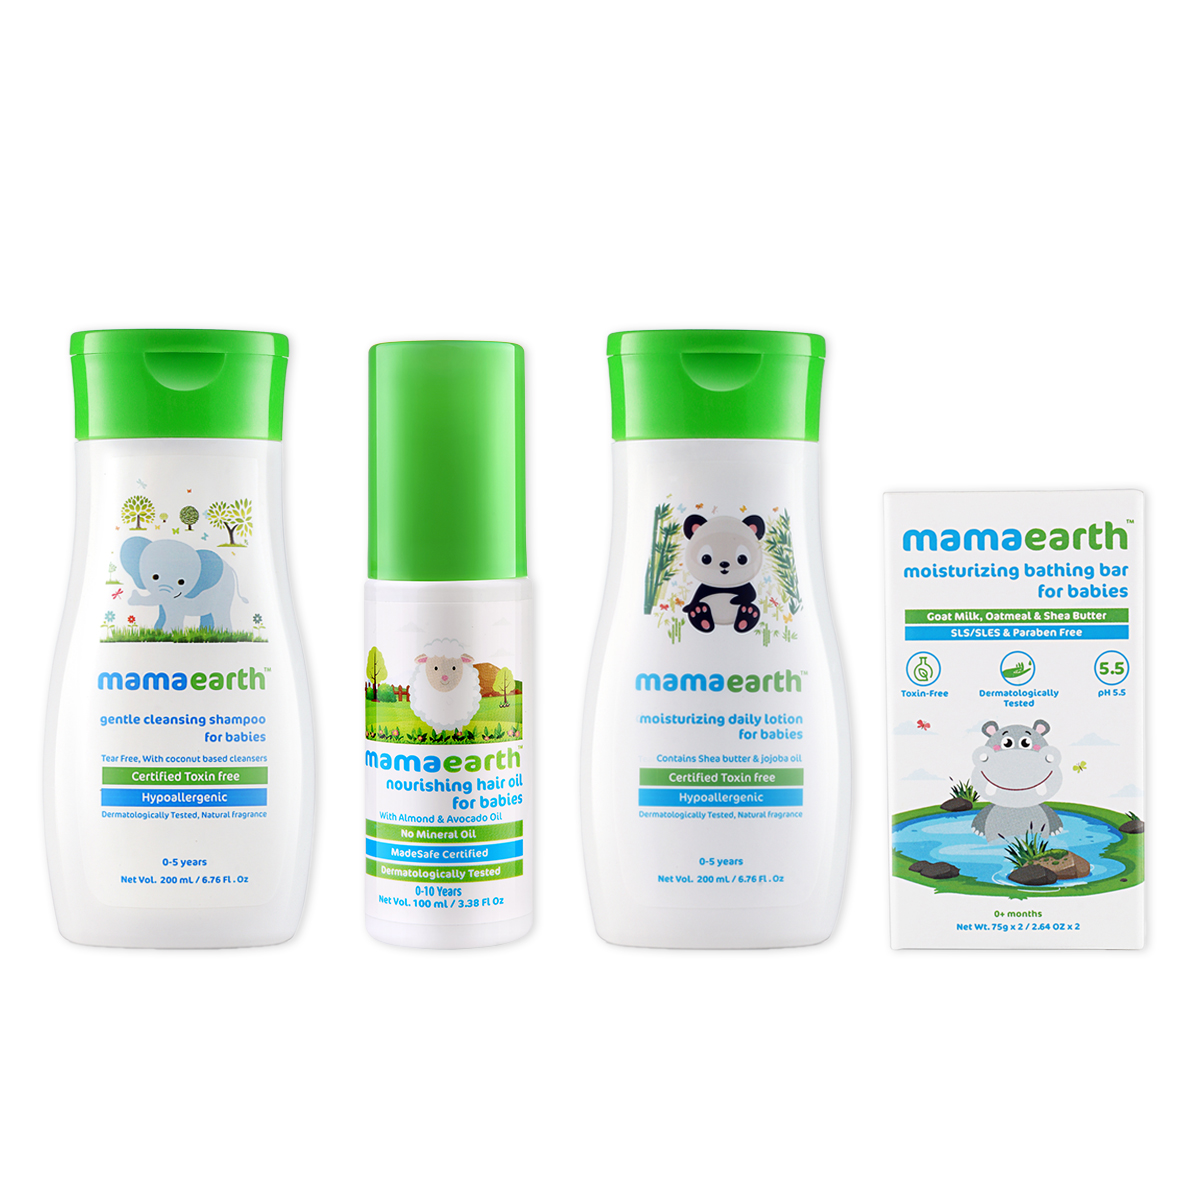 mamaearth products for babies